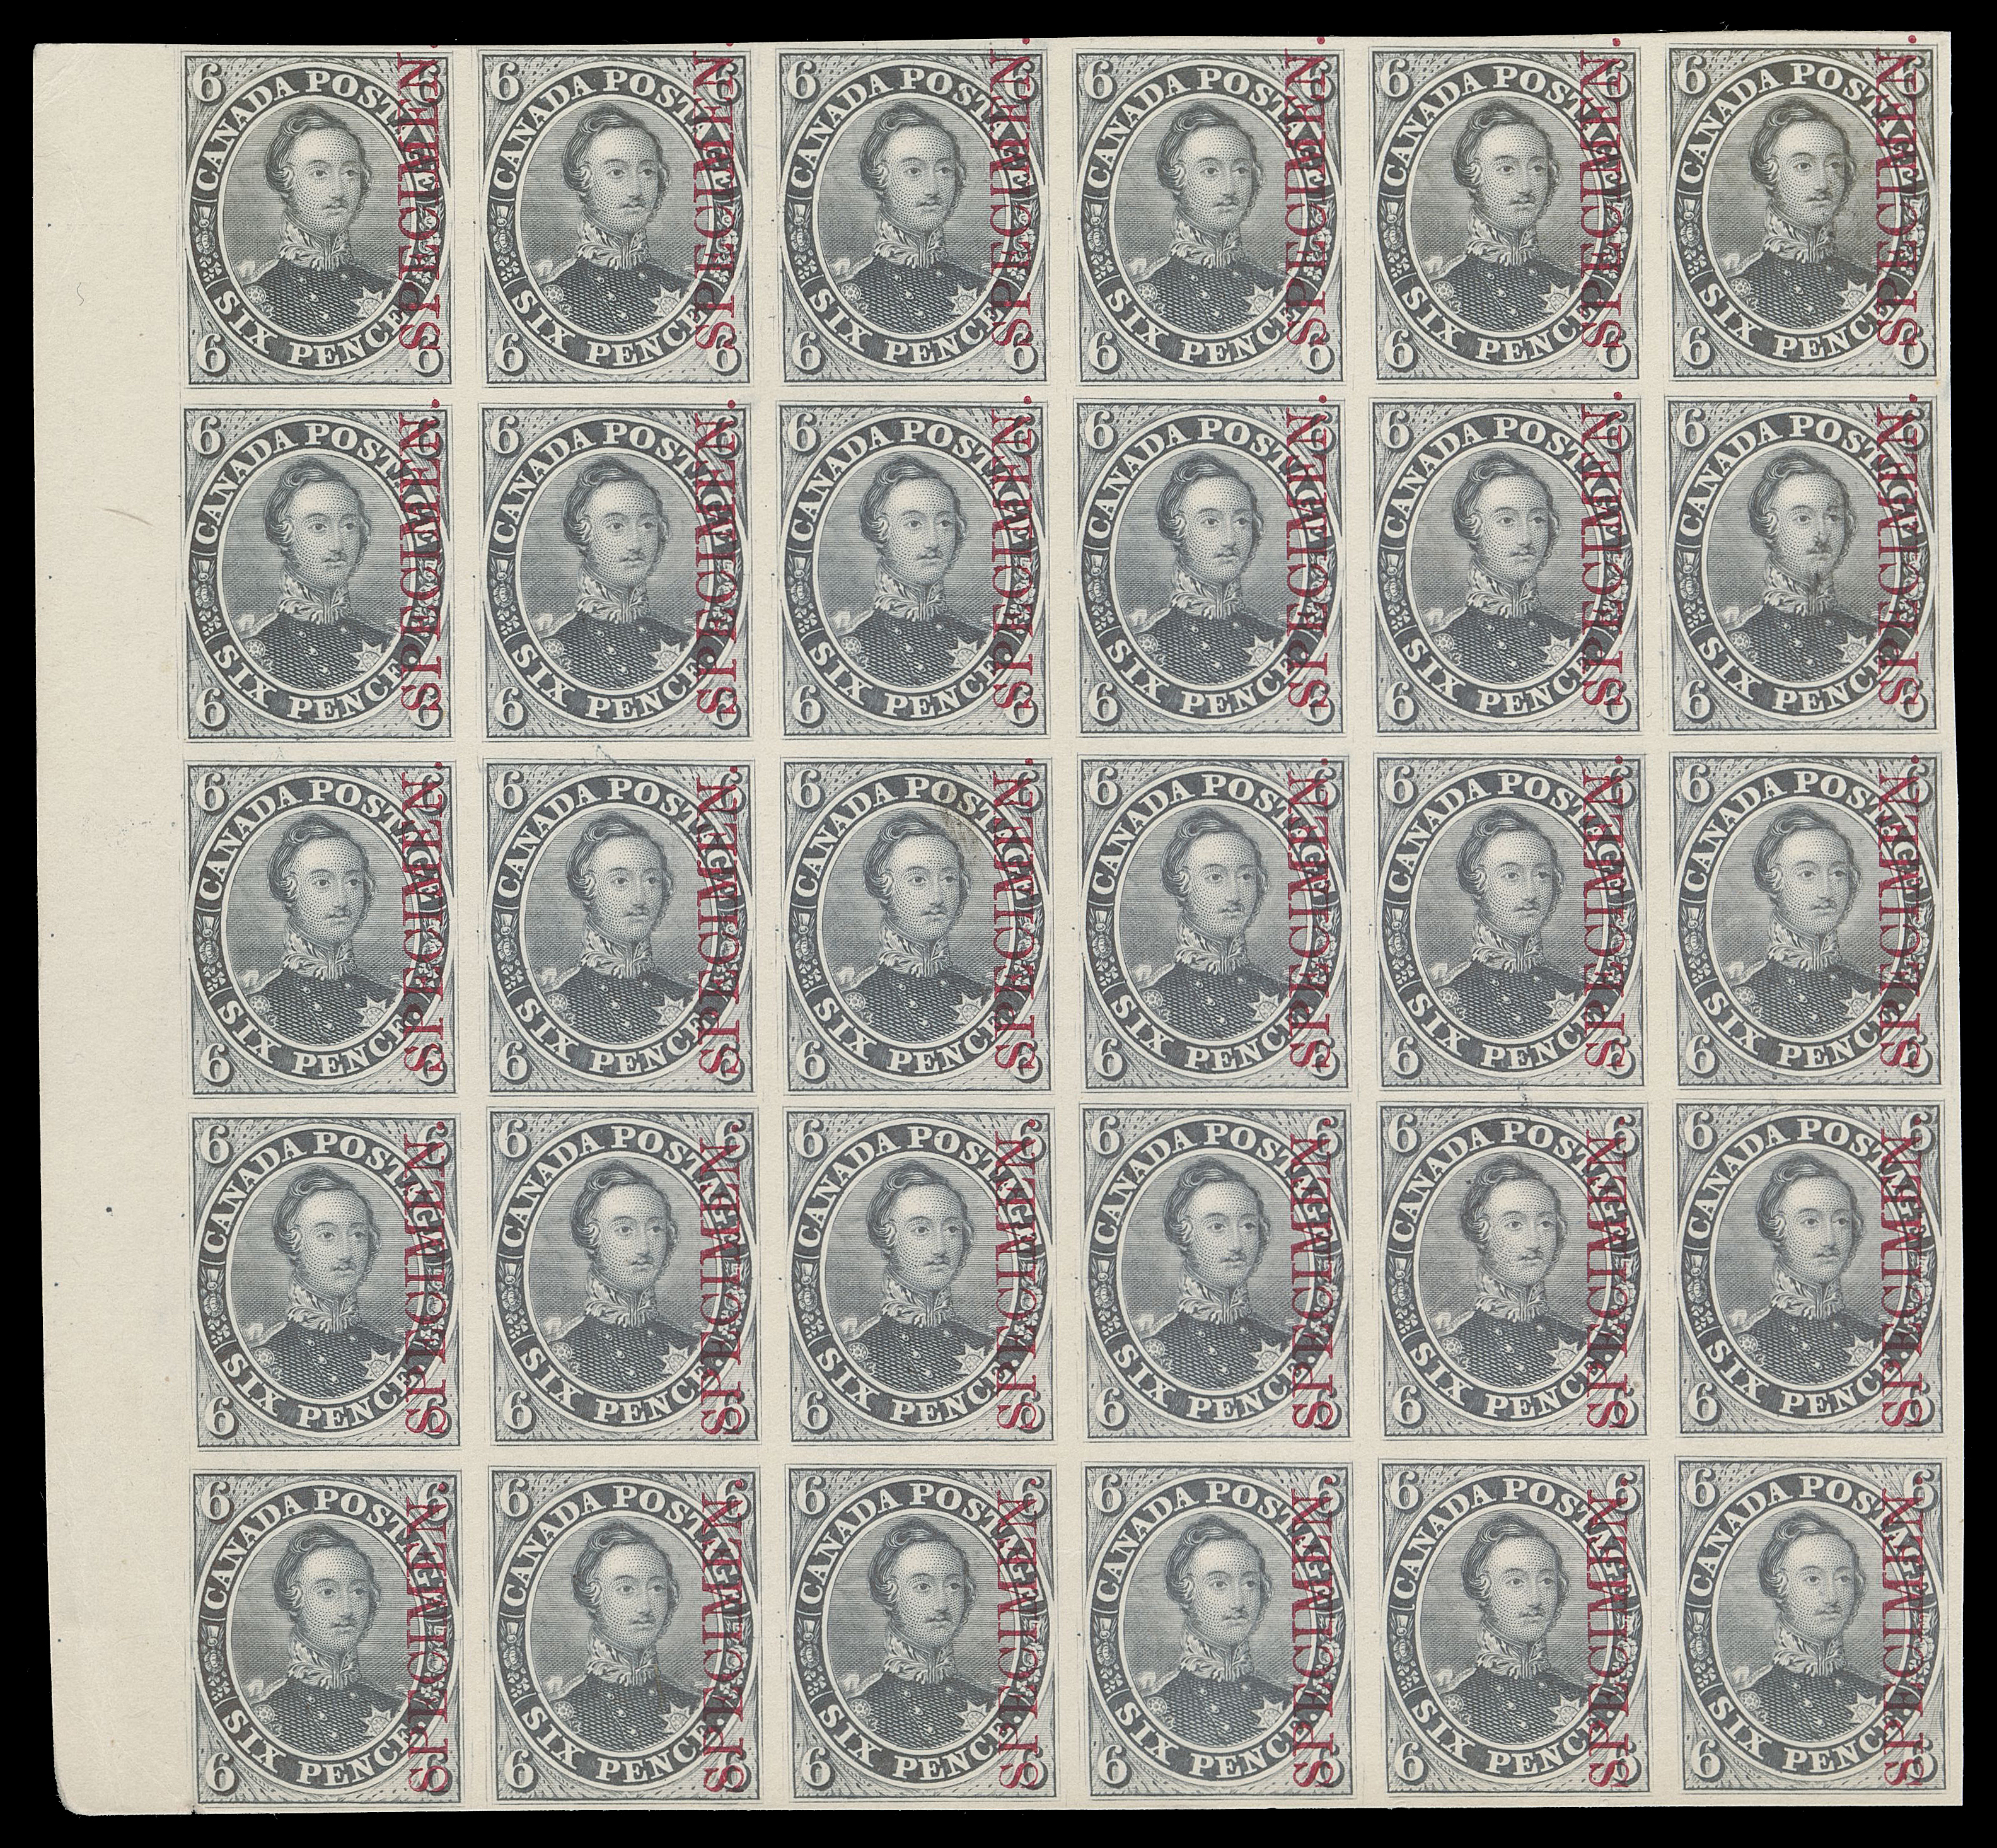 SIX PENCE AND TEN CENTS  2TCvii,Trial colour plate proof block of thirty (6x5) printed in dark grey on card mounted india paper, vertical SPECIMEN overprint in carmine. A very scarce multiple that is among the largest extant, VF (Unitrade cat. $9,000)